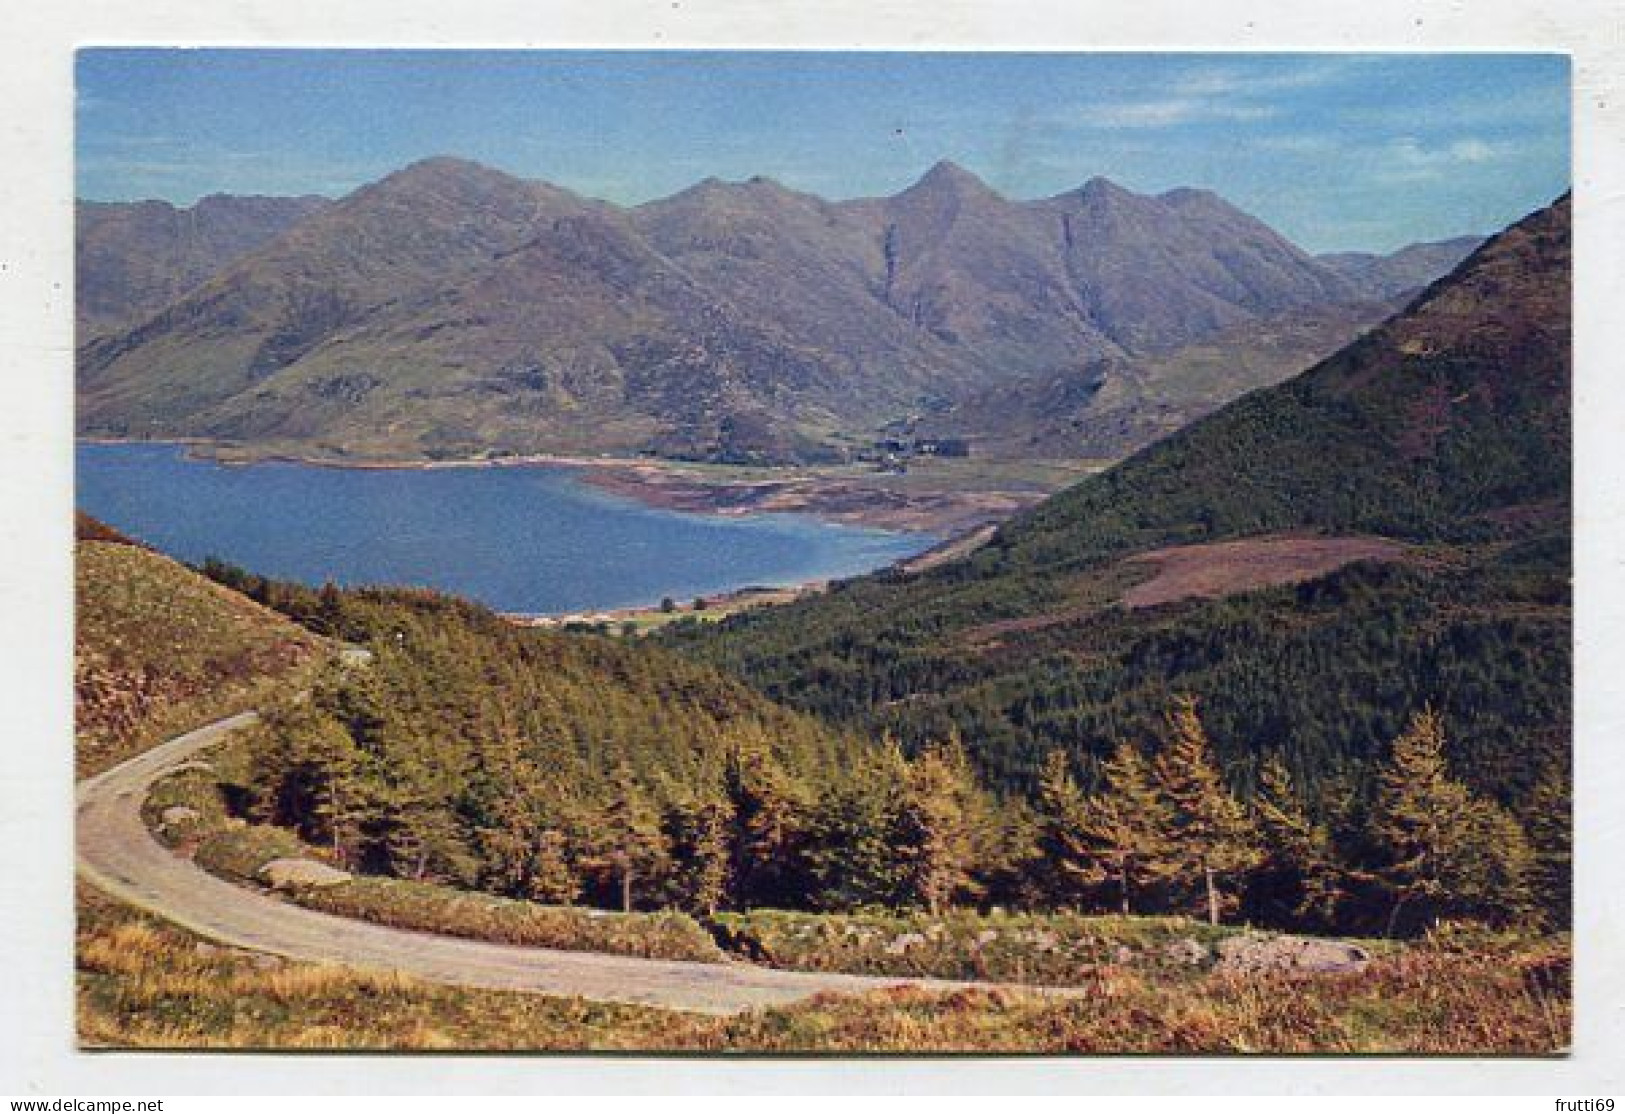 AK 146147 SCOTLAND - Western Ross - The Five Sisters Of Kintail And Loch Duich - Ross & Cromarty